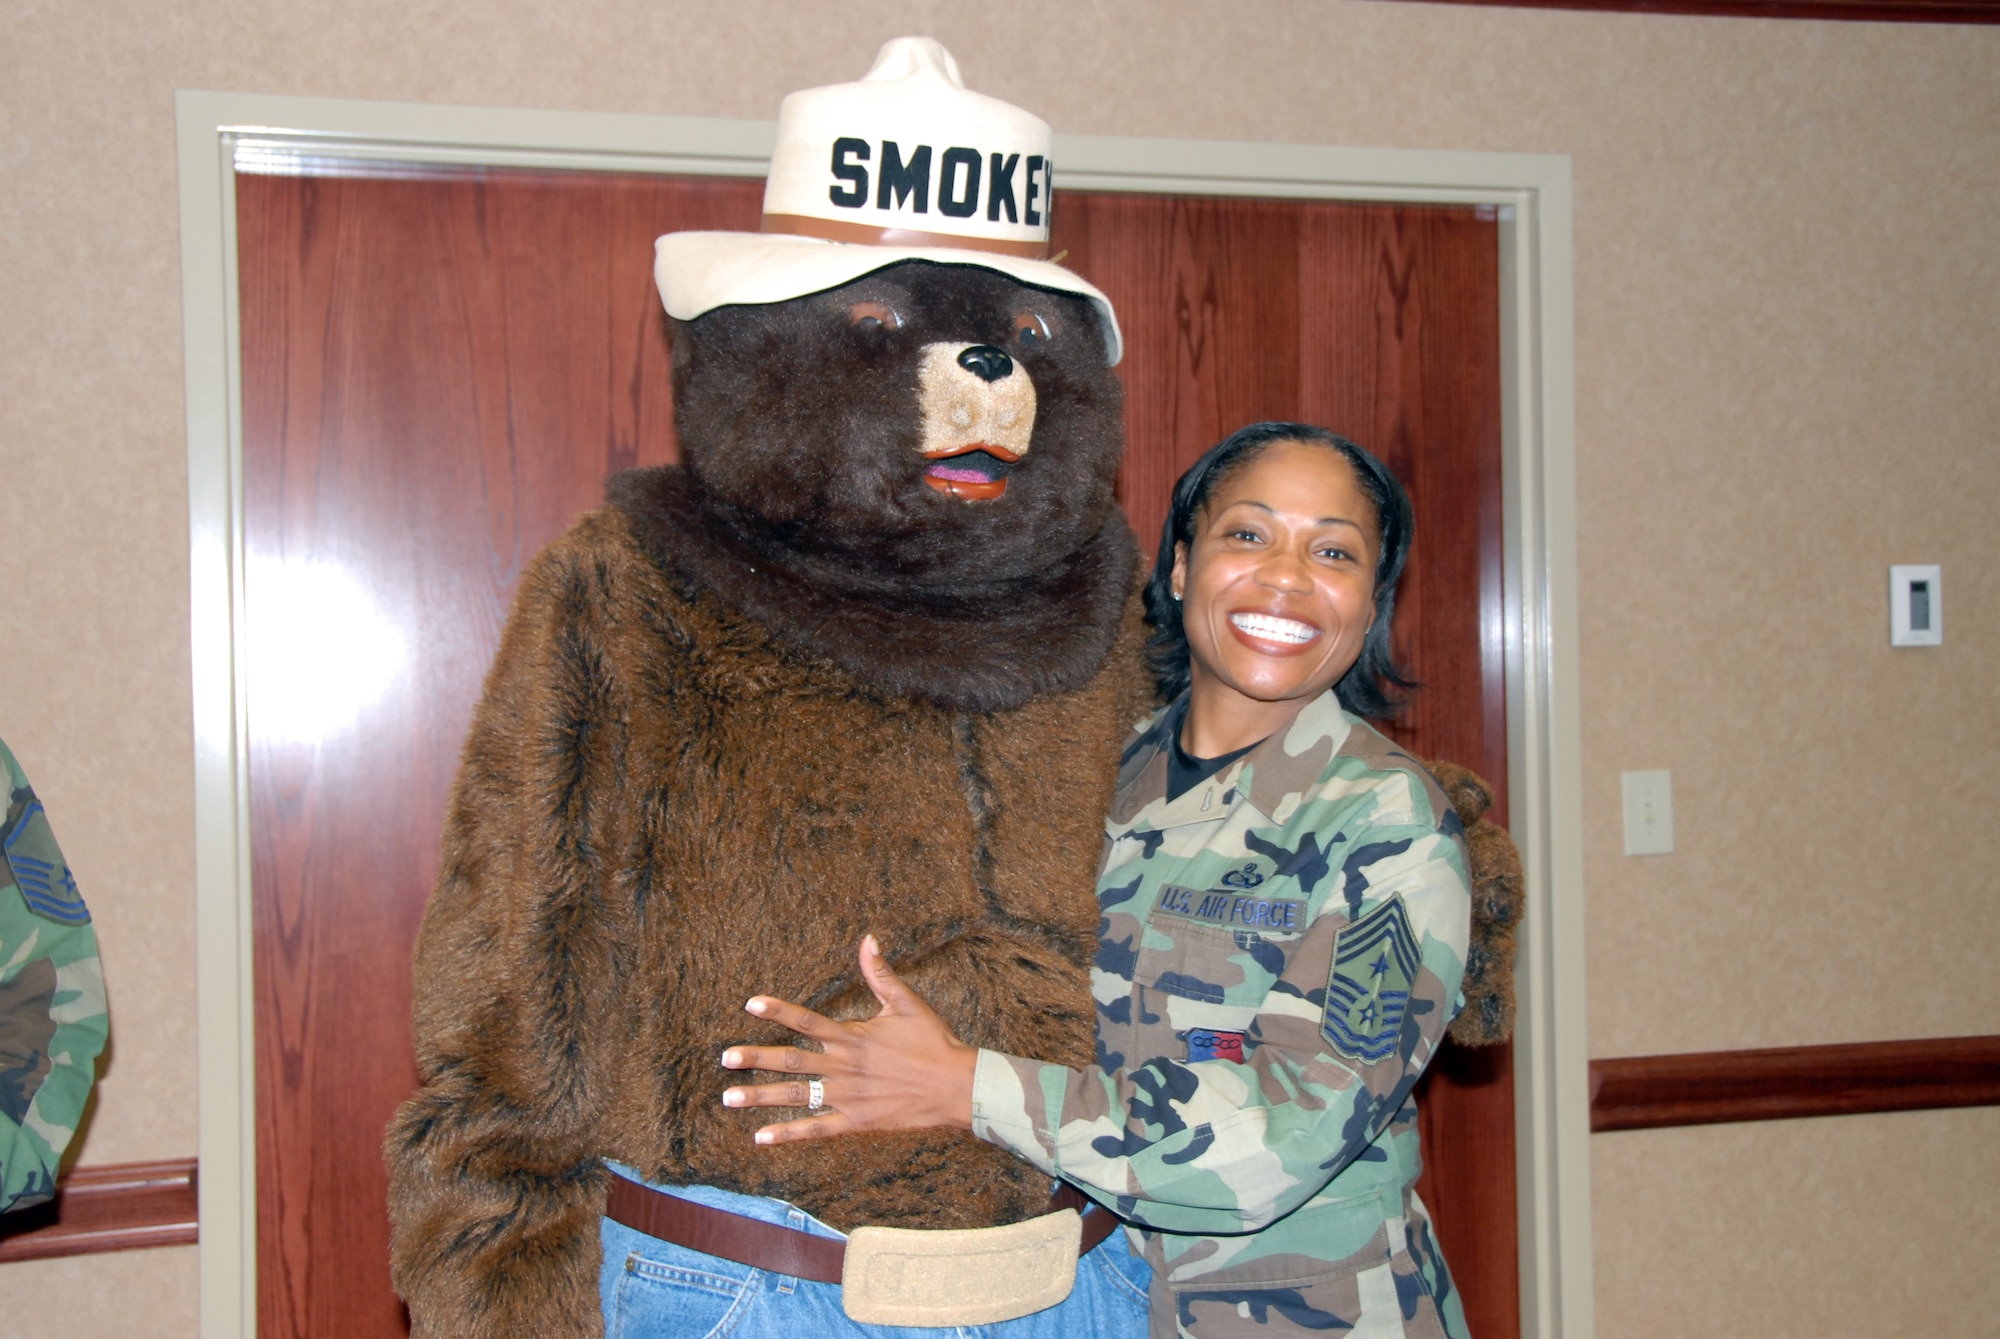 As part of the Fire Prevention Week campaign, Smokey the Bear visited the 78th Air Base Wing staff meeting, where he gave Chief Master Sgt. Carol Dockery, command chief, a big hug. (U. S. Air Force photo by Sue Sapp)